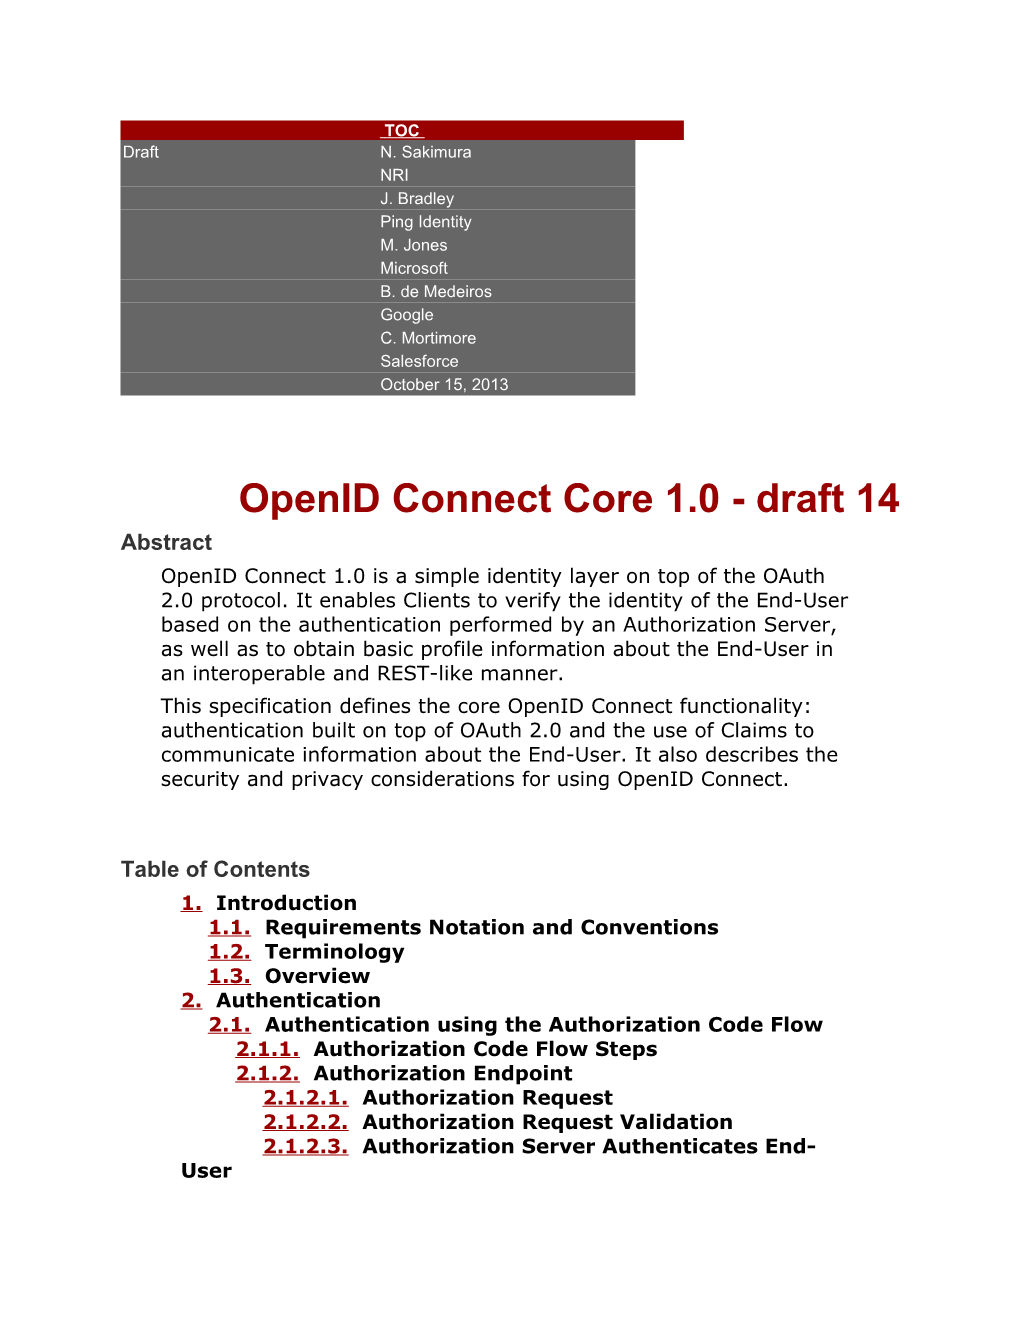 Draft: Openid Connect Core 1.0 - Draft 14